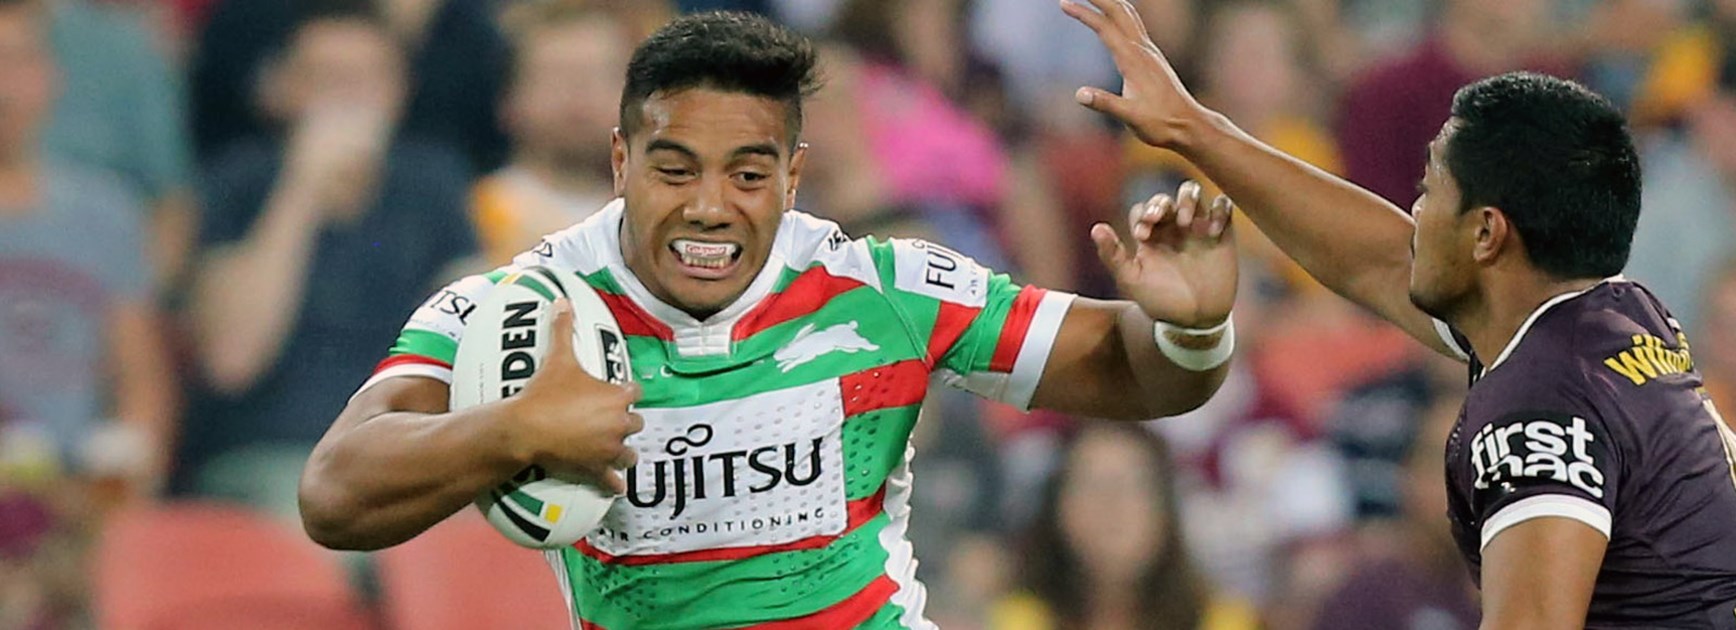 Rabbitohs centre Hymel Hunt left the field through injury against the Broncos in Round 8.